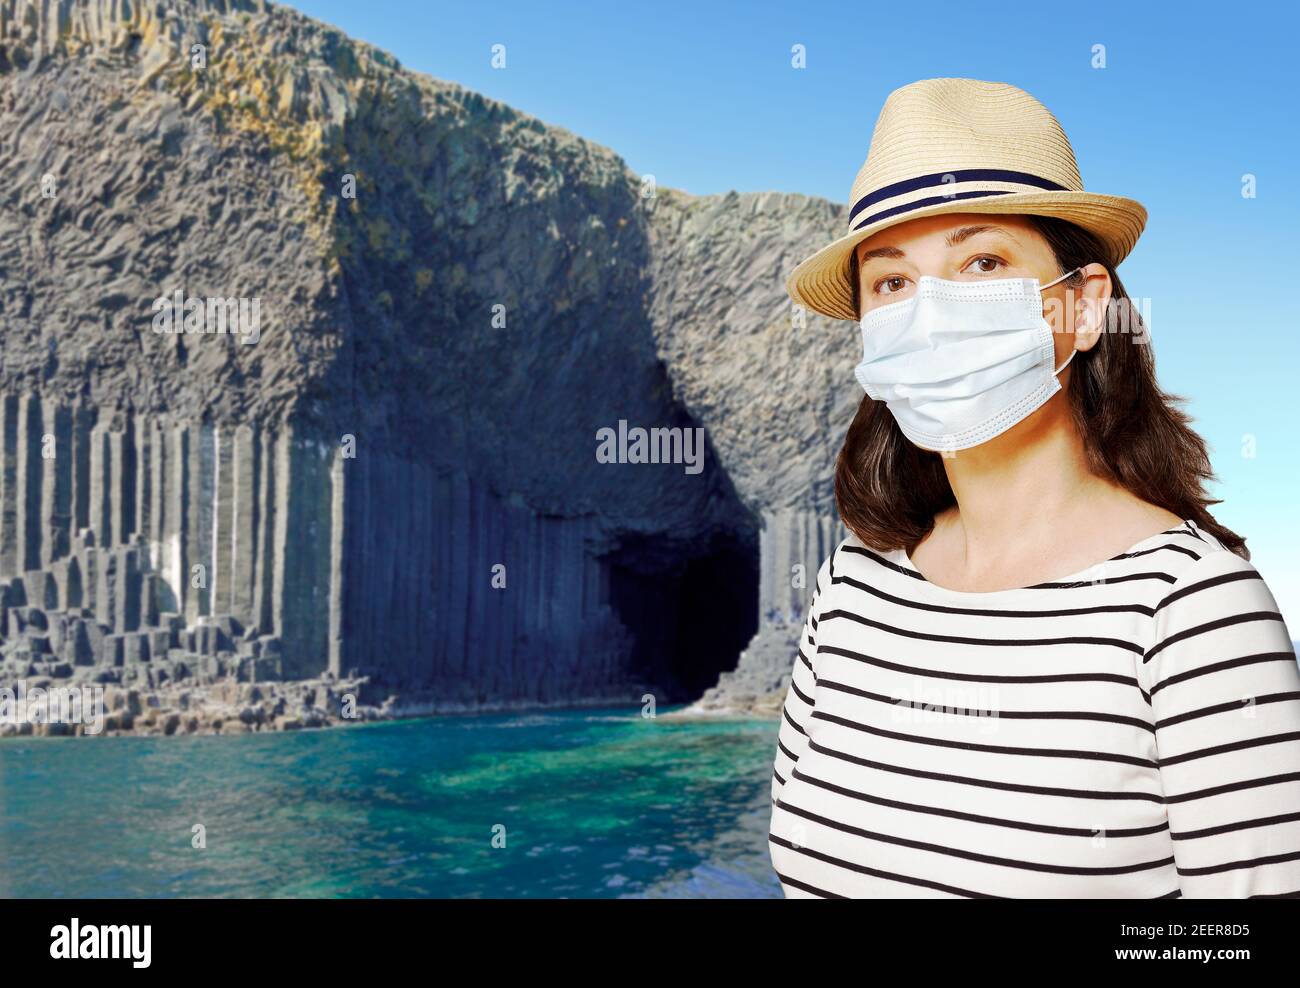 Travelling during the corona or covid pandemic: woman tourist wearing protective face mask at Staffa, Hebrides, Scotland. Stock Photo